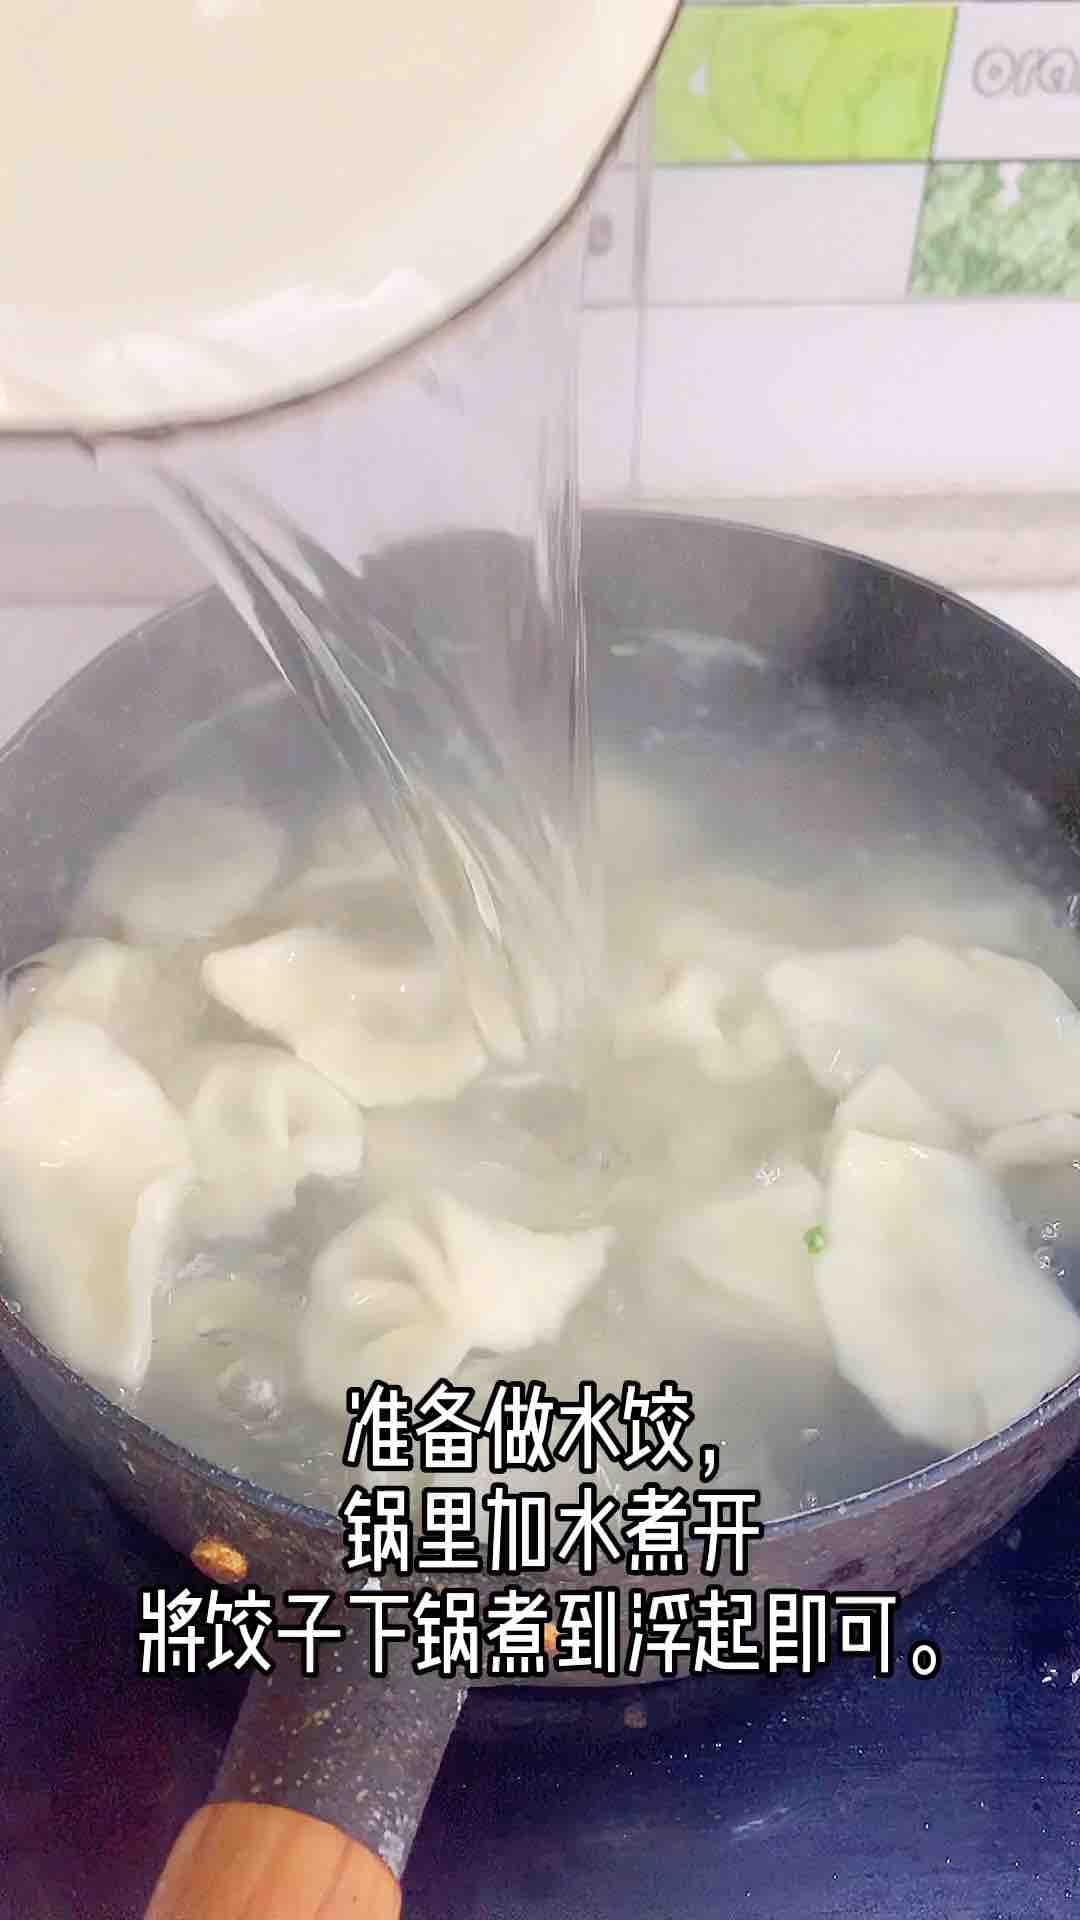 The Winter Solstice is As Big As The Year. Winter Solstice Dumplings are Tender and Fresh Boiled, Crisp and Fragrant recipe